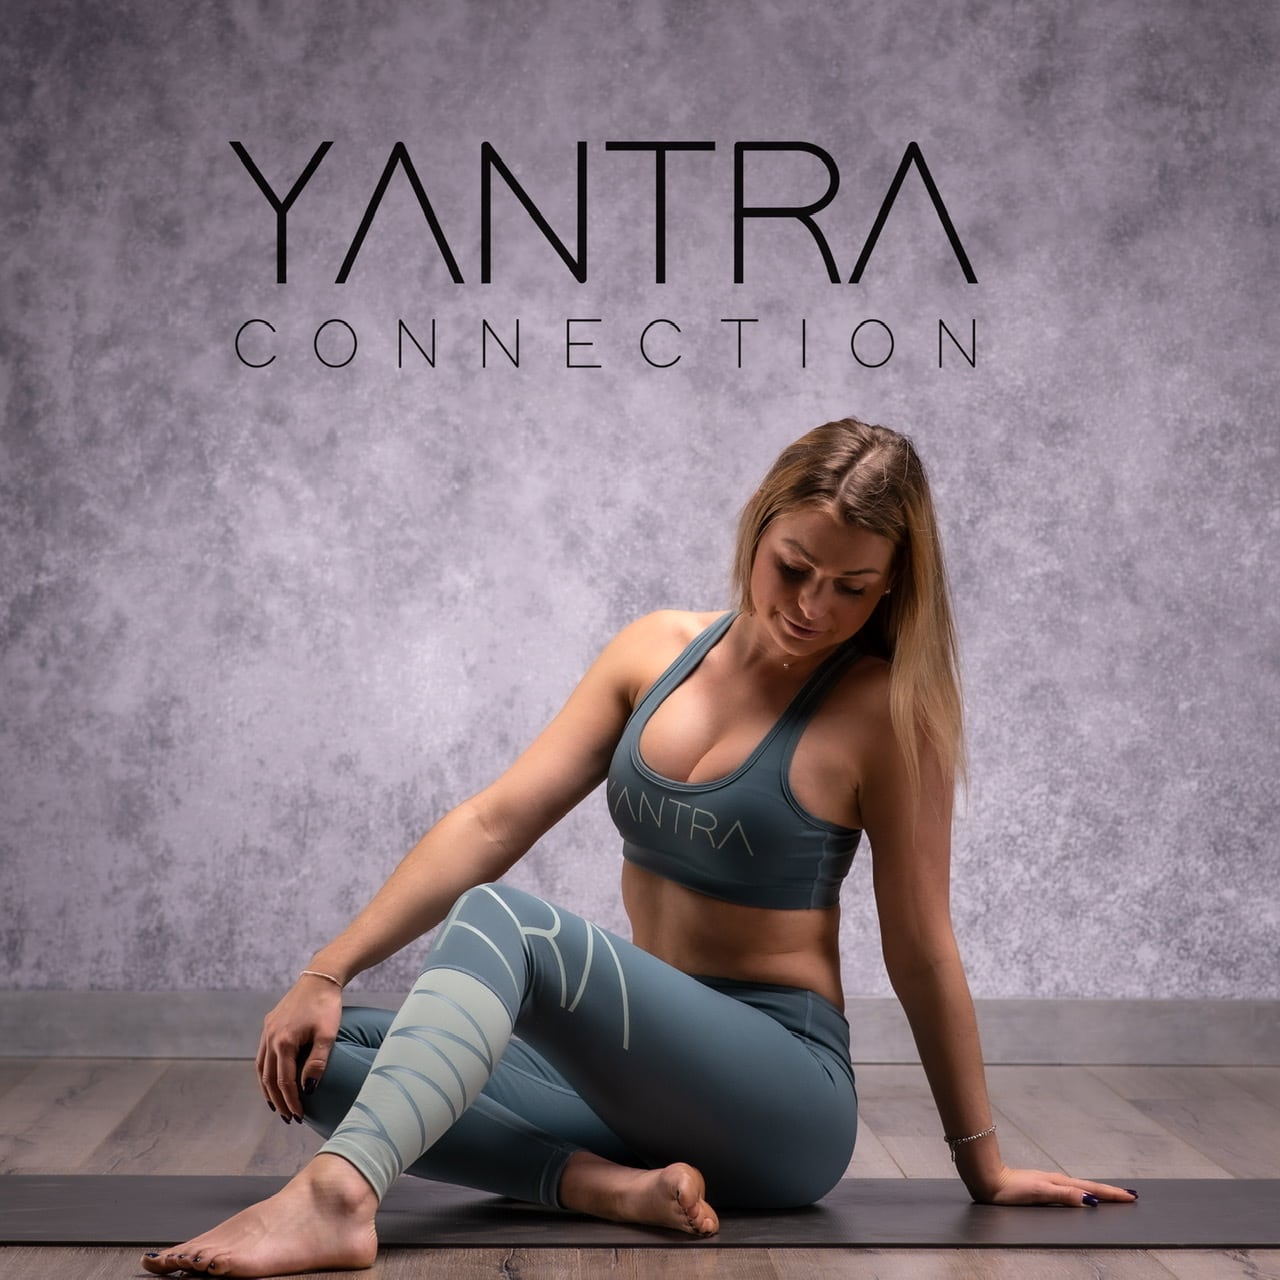 Yantra Connection